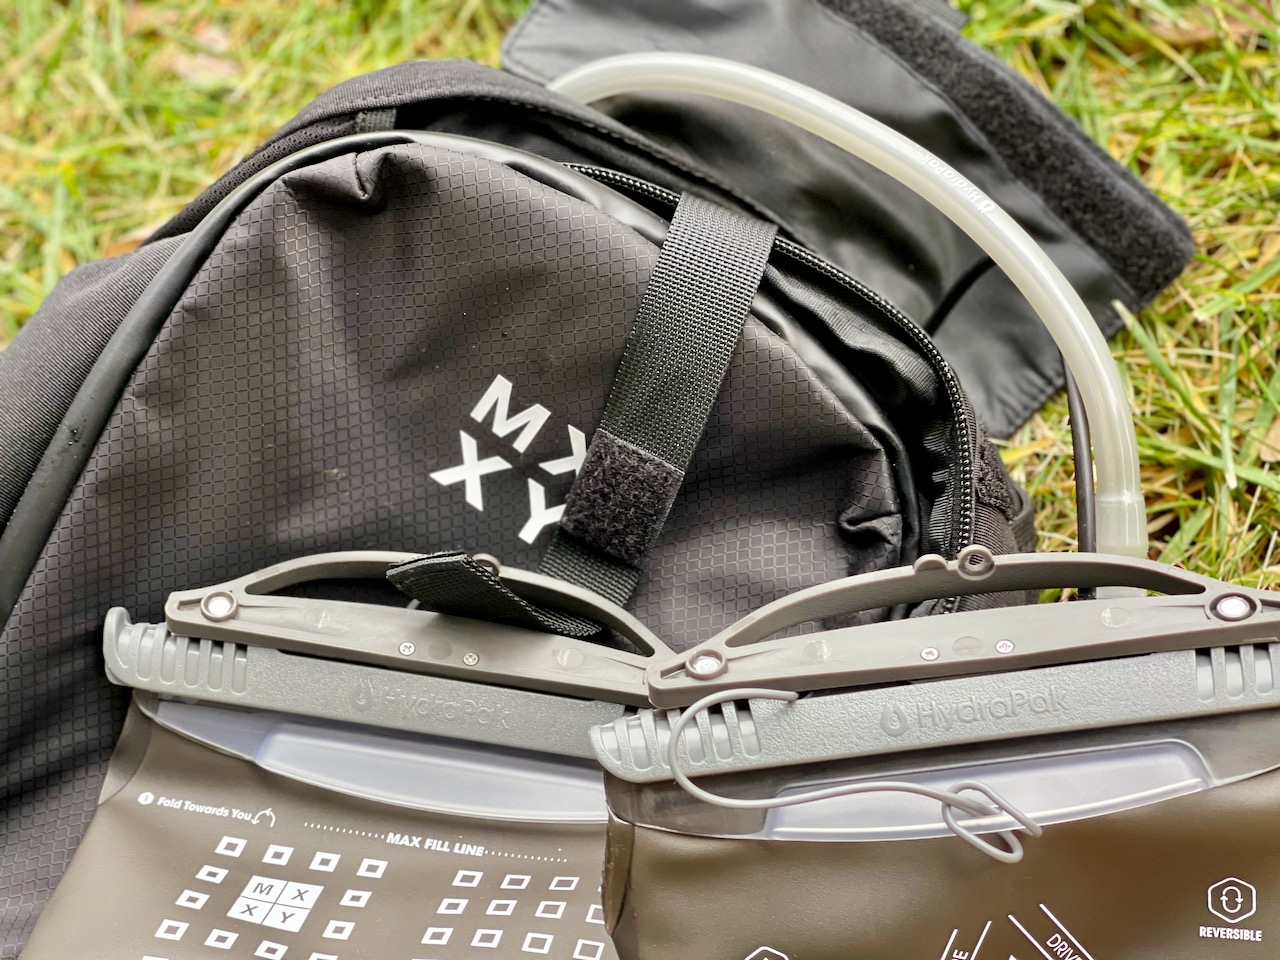 MXXY hydration pack install